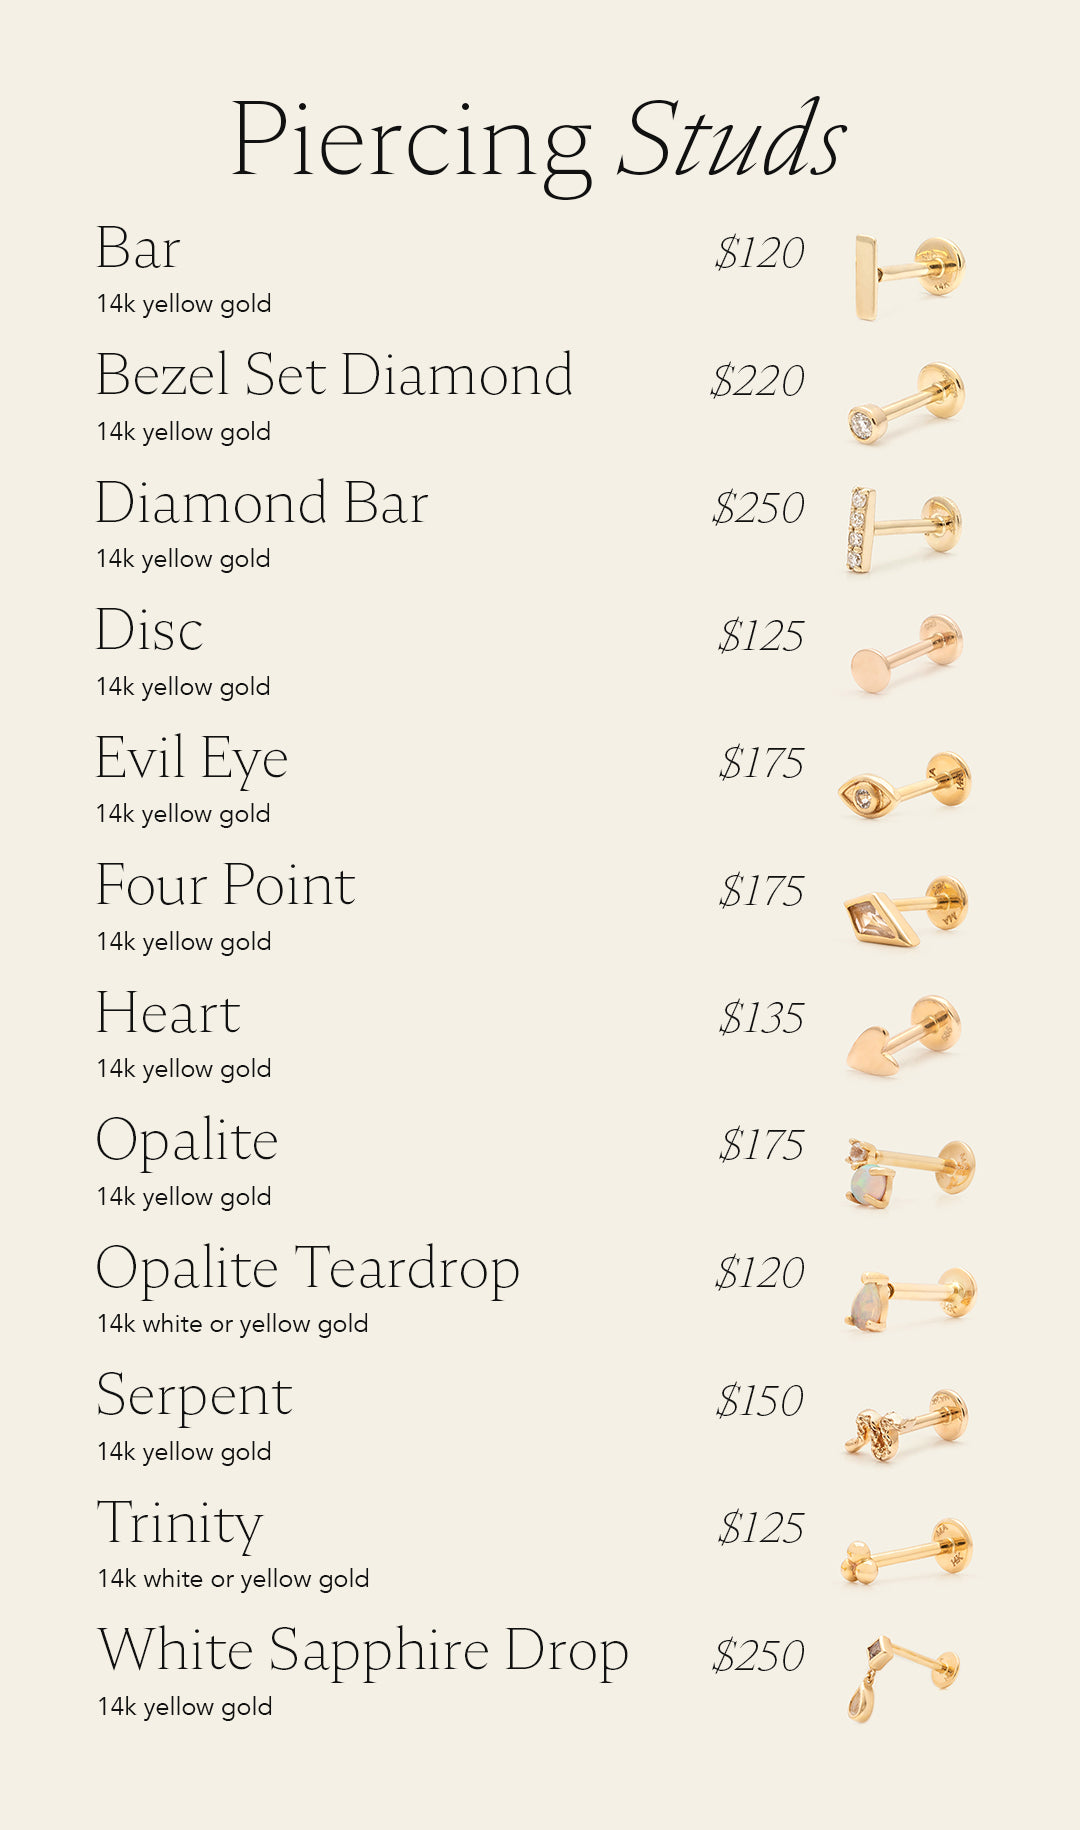 Visual pricing list of different options of piercing studs.